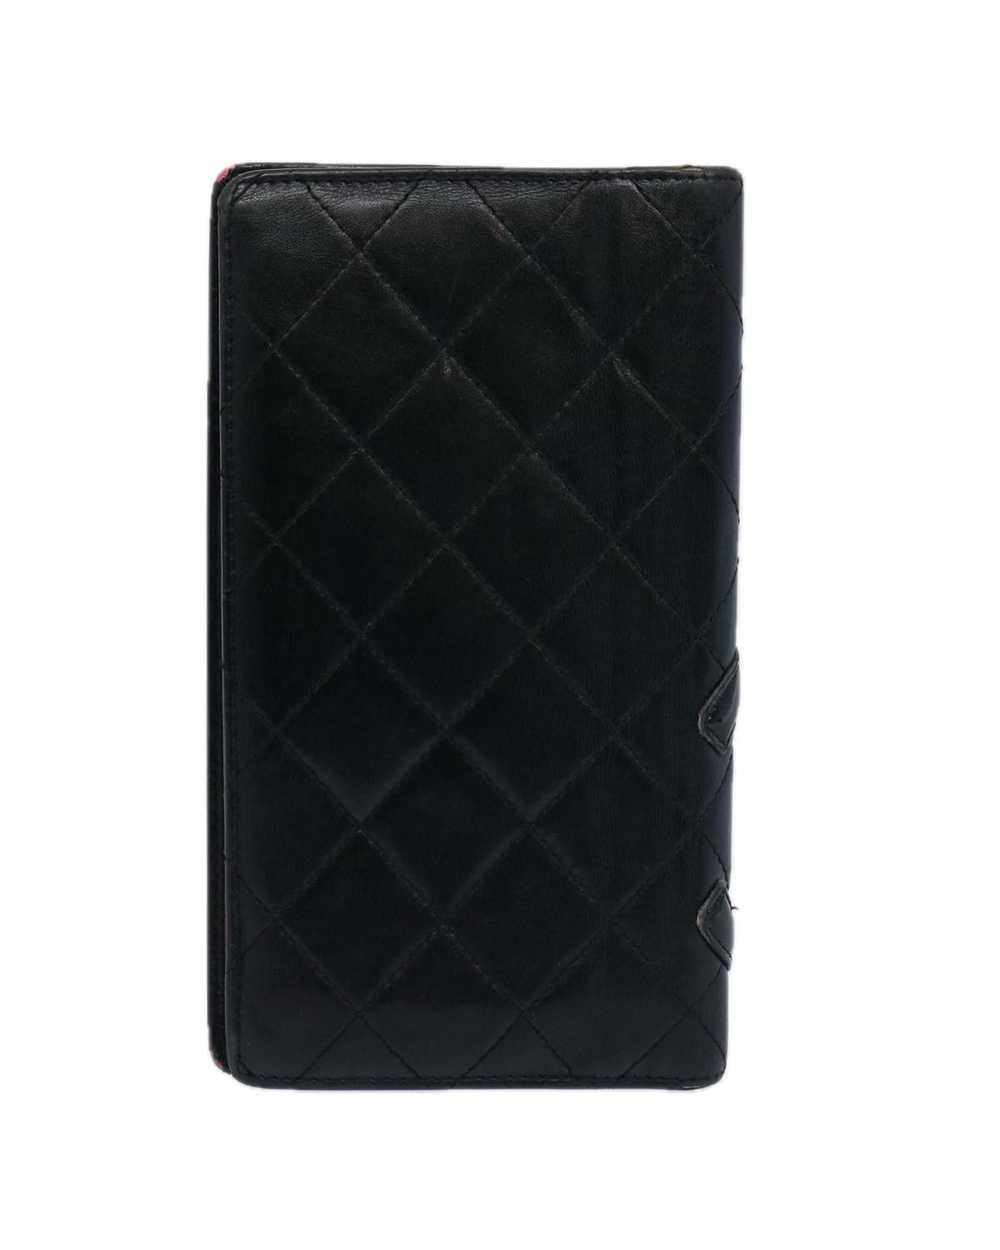 Chanel Black Leather Long Wallet with CC Logo by … - image 2